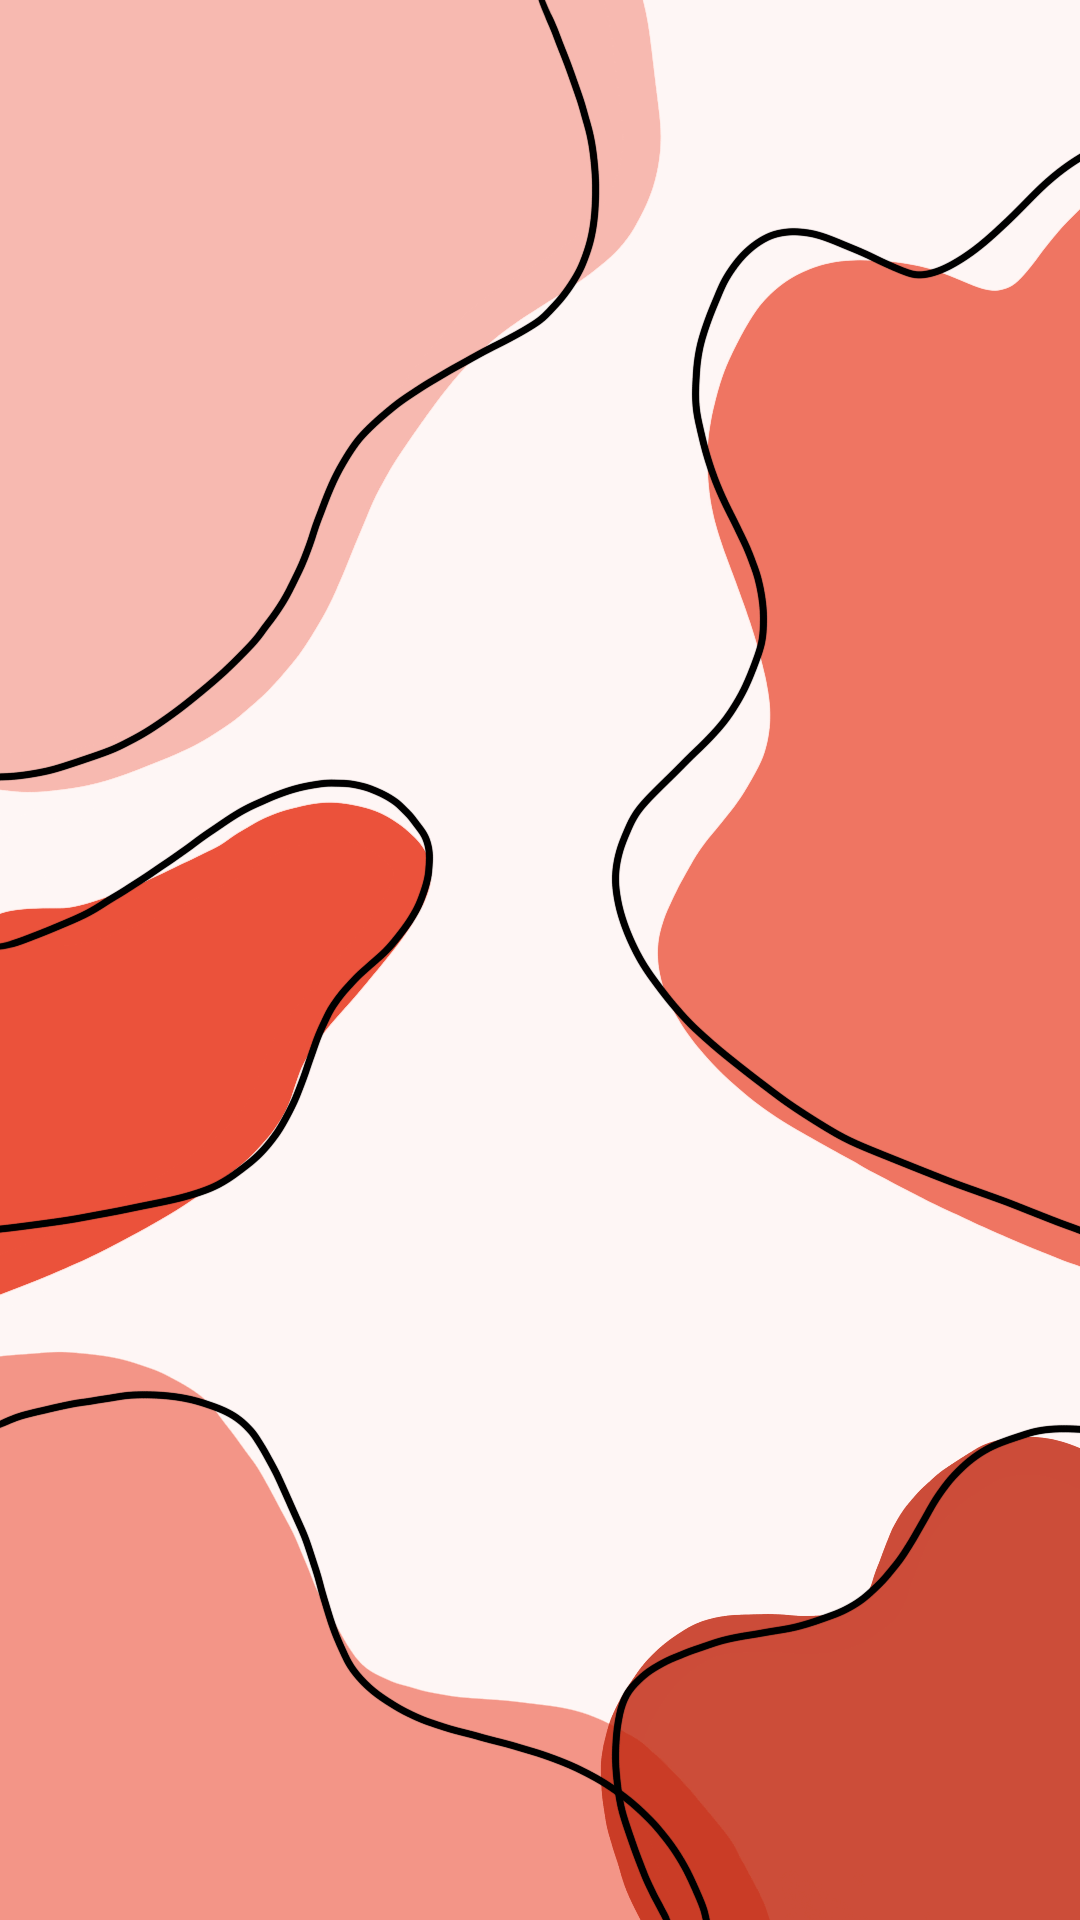 A drawing of some red and white shapes - Cow, couple